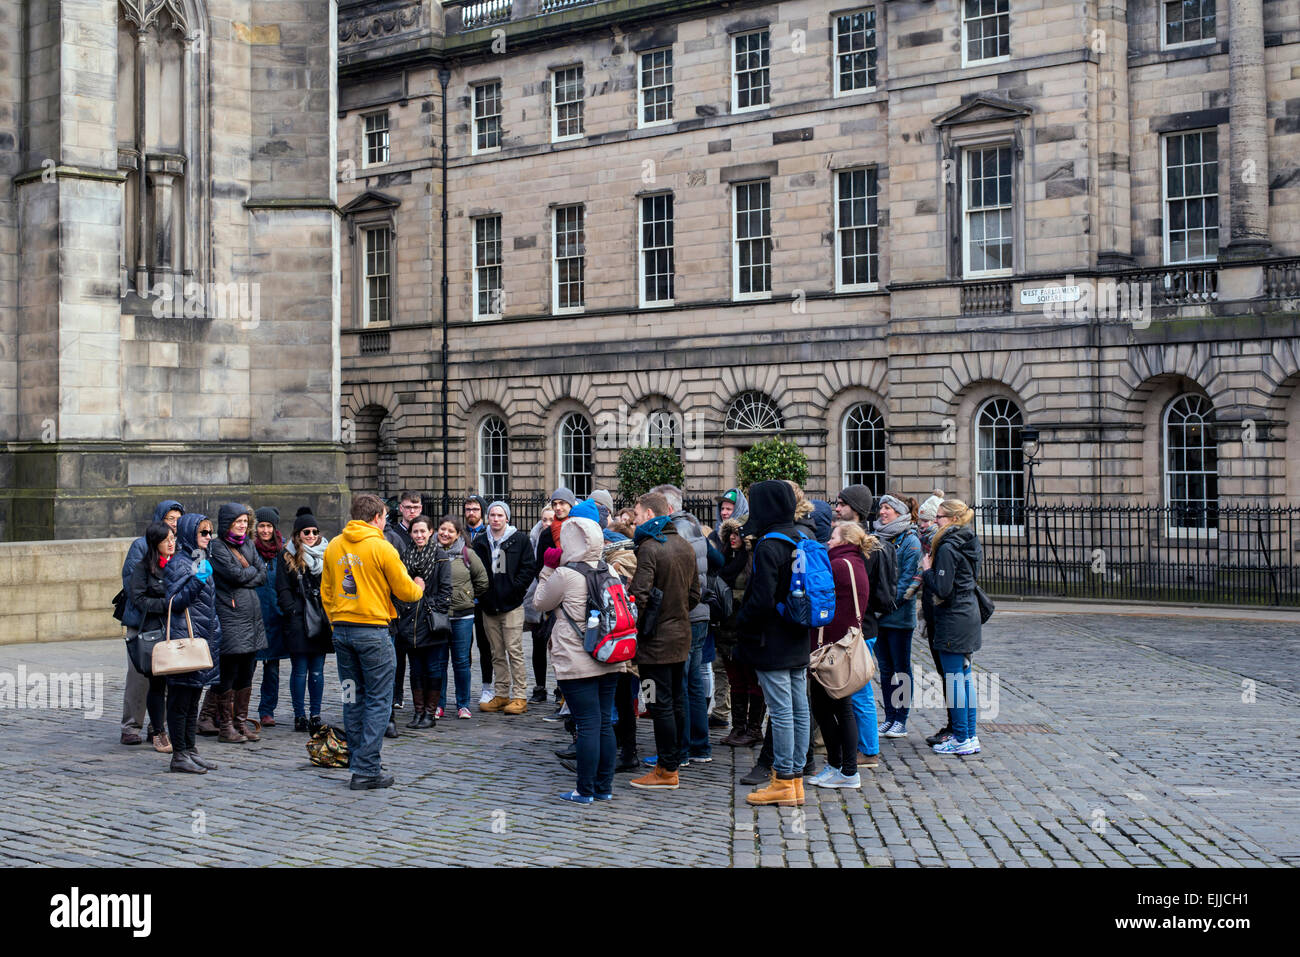 A group of tourists on a guided walking tour visit Parliament Square on the Royal Mile in Edinburgh, Scotland, UK. Stock Photo